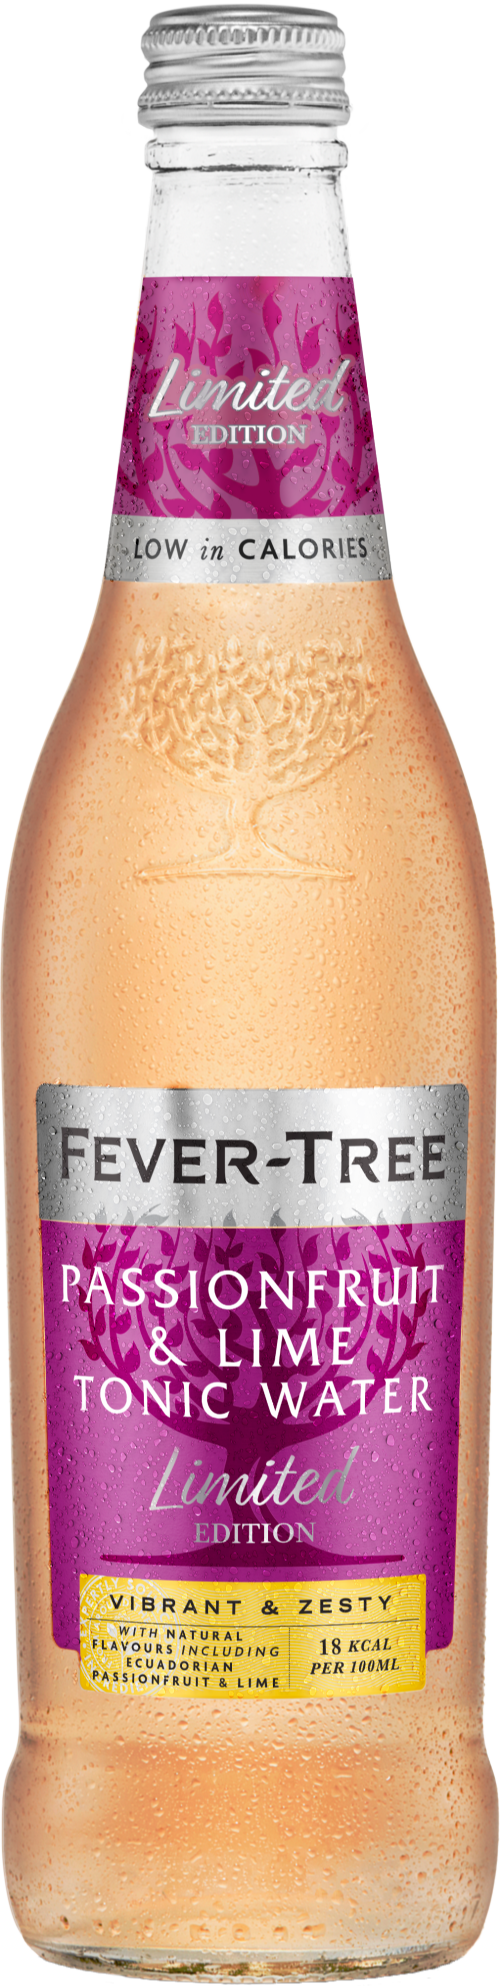 FEVER-TREE Passionfruit & Lime Tonic Water 500ml